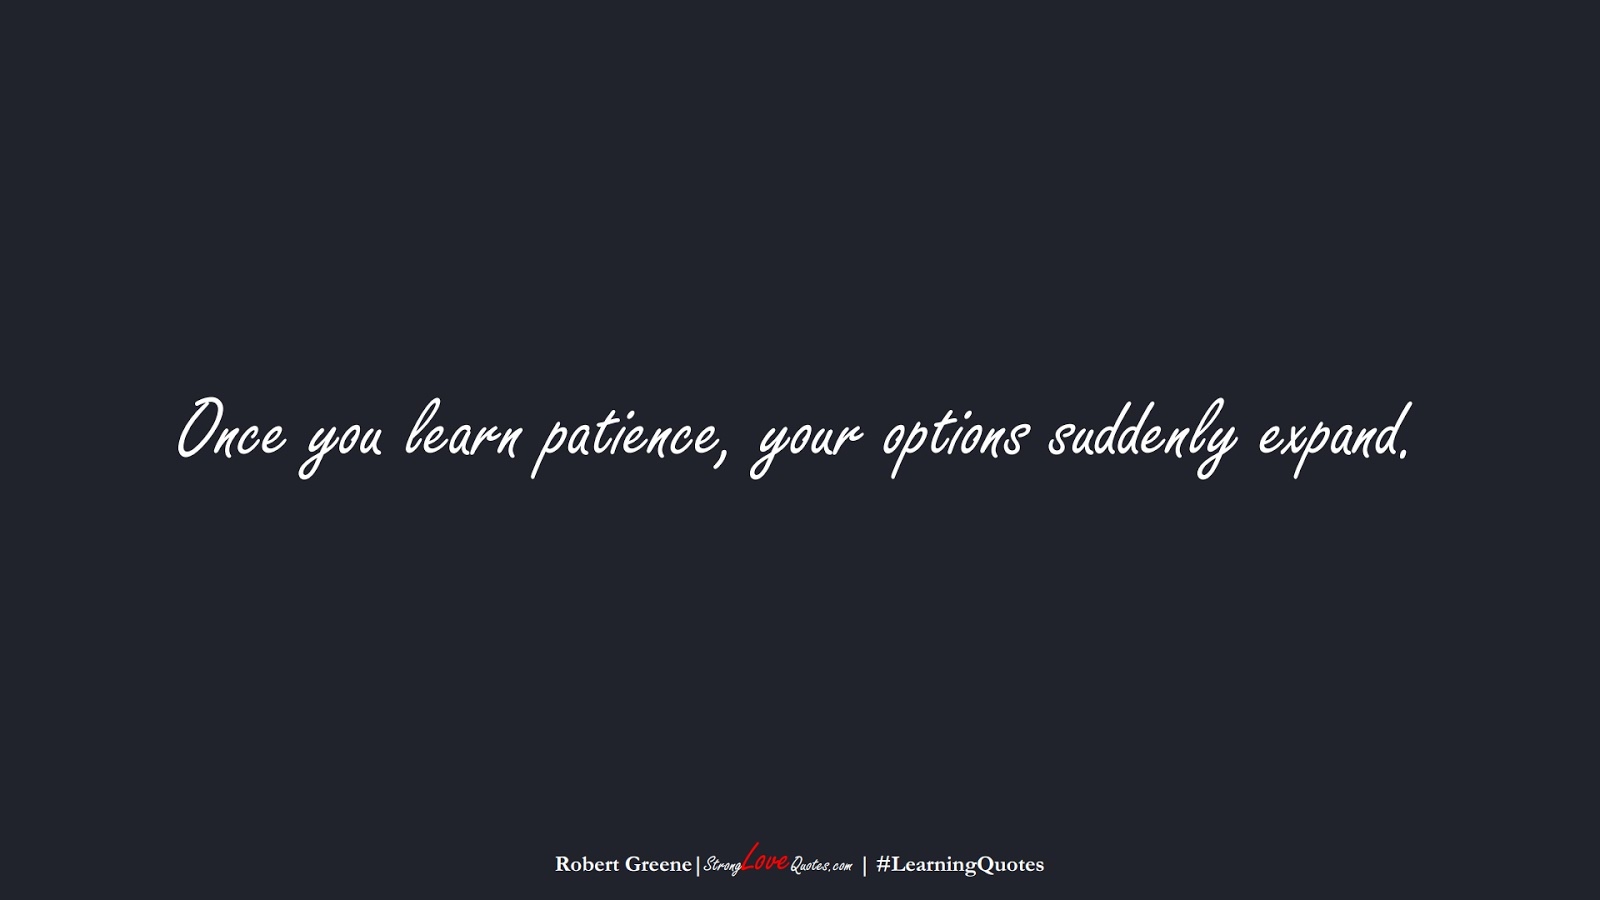 Once you learn patience, your options suddenly expand. (Robert Greene);  #LearningQuotes